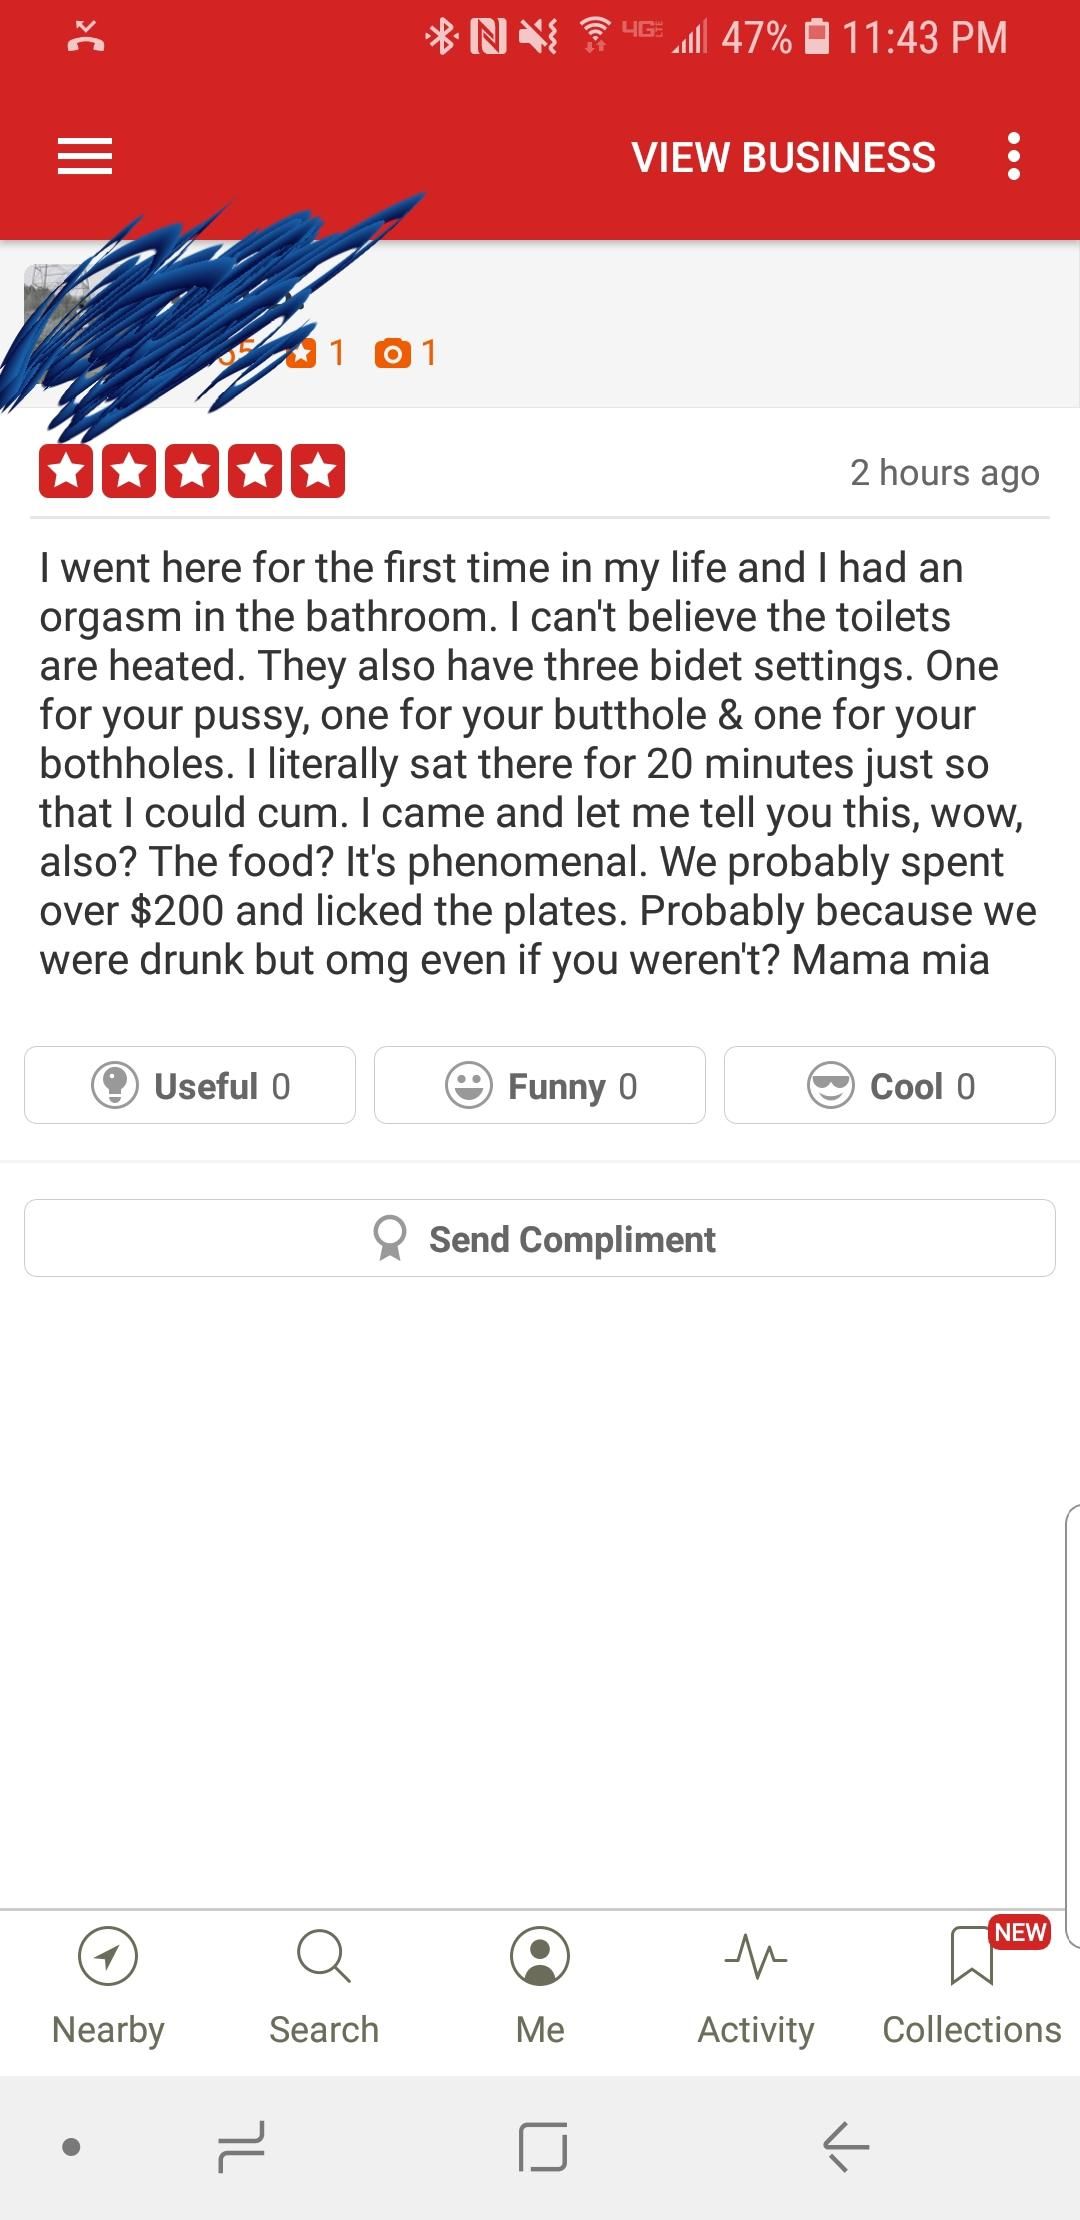 My new job has a bidet in the bathroom. This is a review of our restaurant we got today